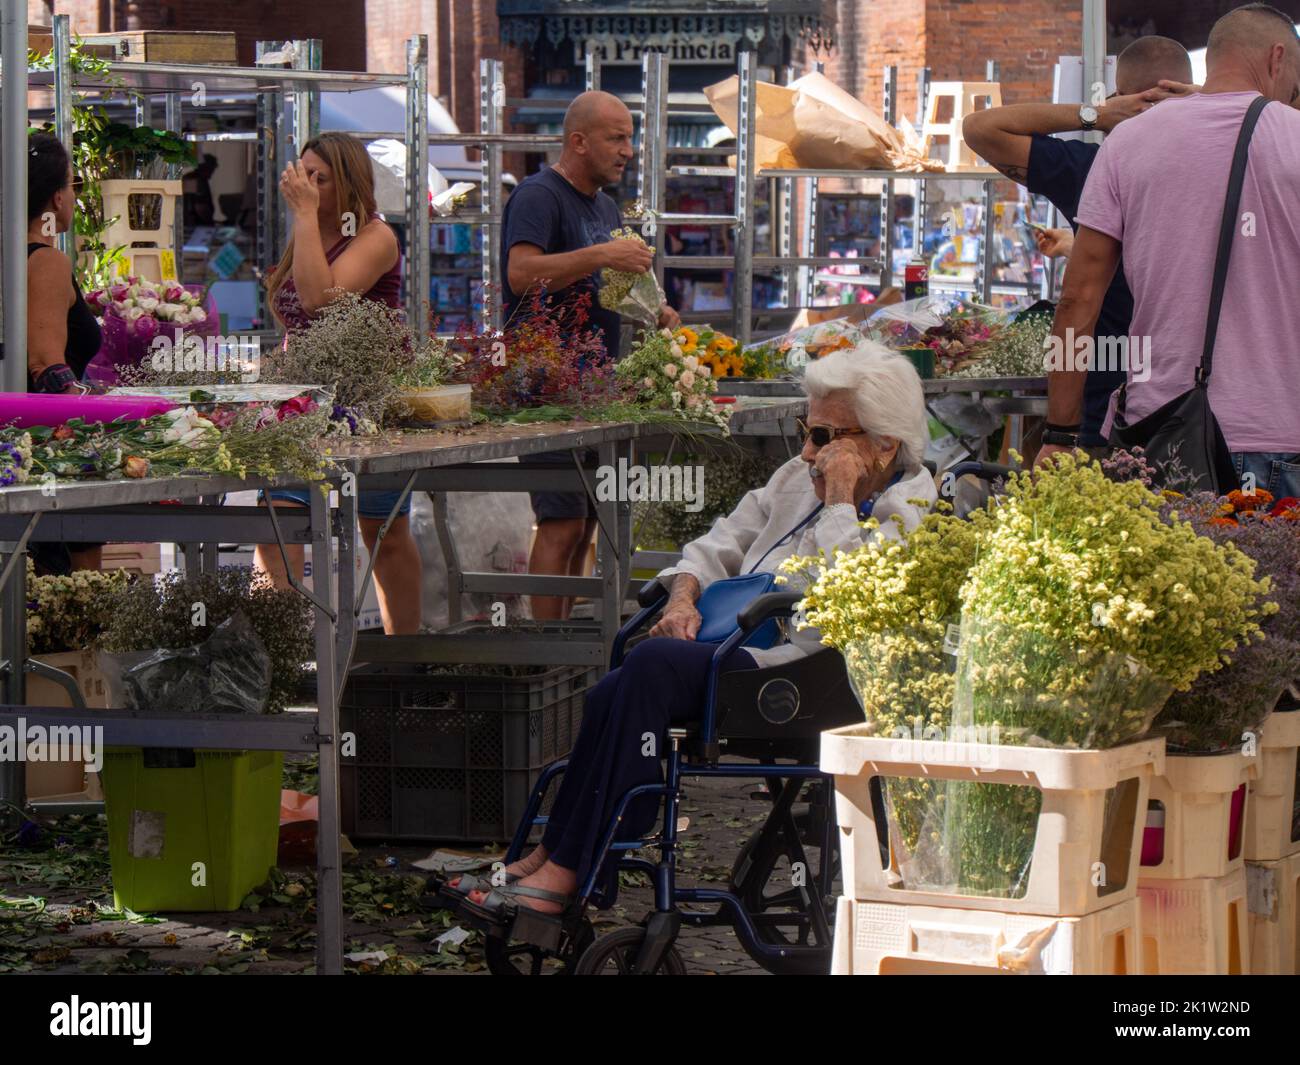 Several people gathered at an open flower market in Cremona Stock Photo